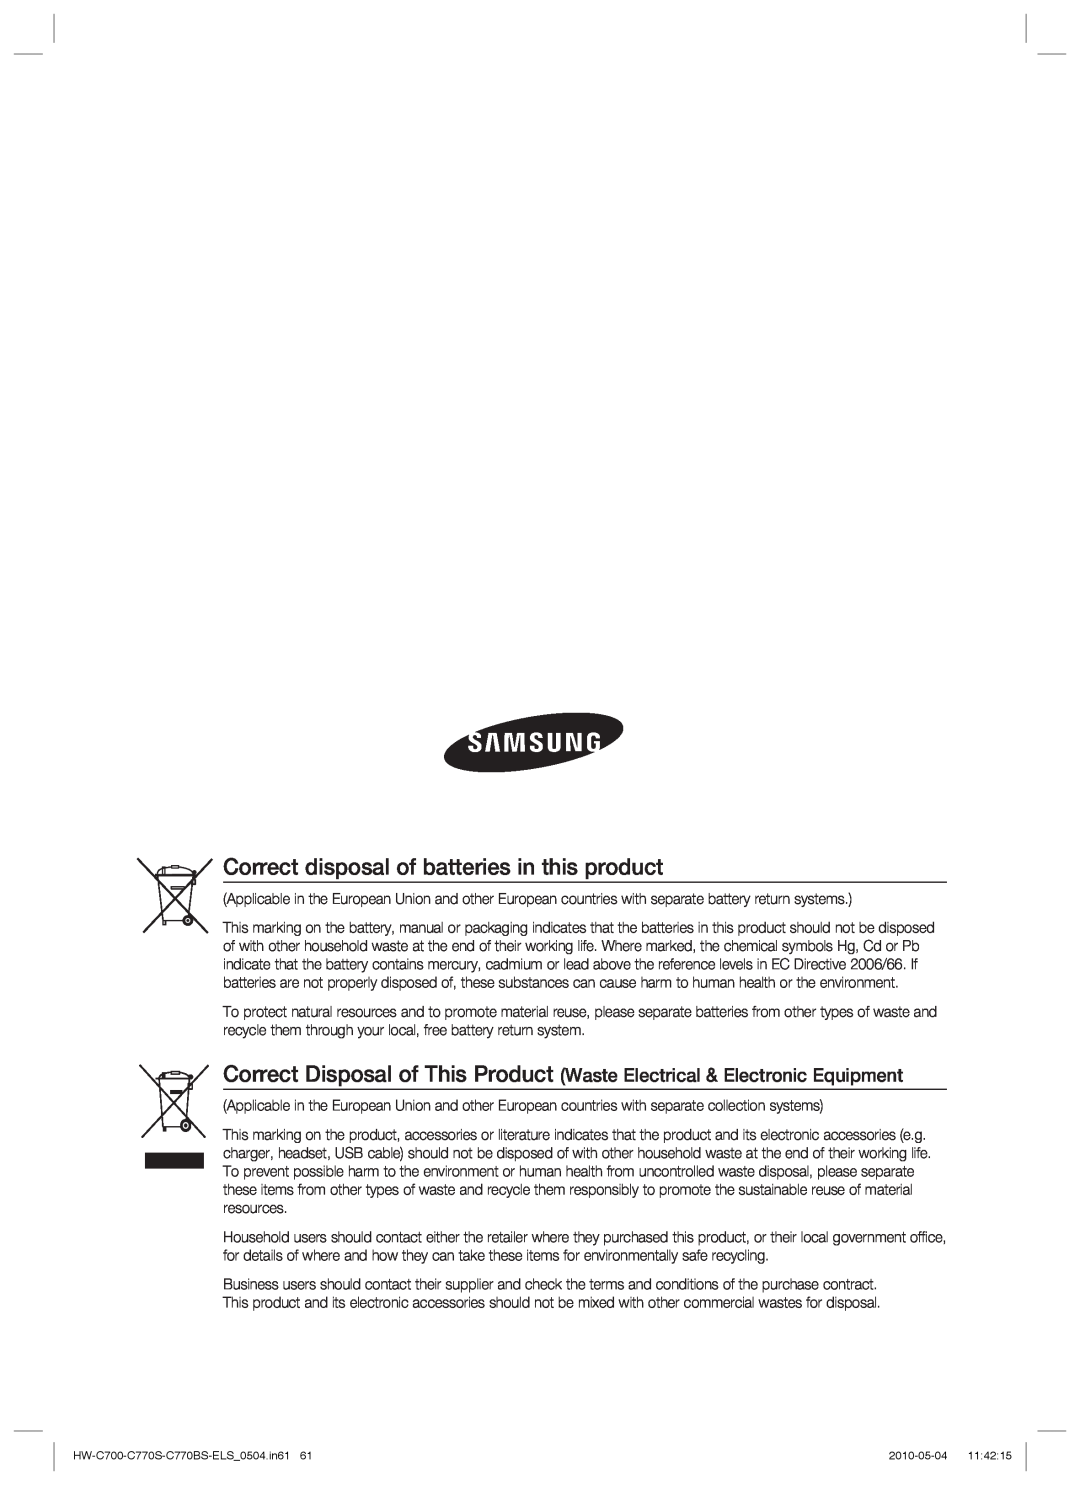 Samsung HW-C700/XEE, HW-C770S/XEN, HW-C700B/XEN, HW-C700/XEN, HW-C700/EDC manual Correct disposal of batteries in this product 